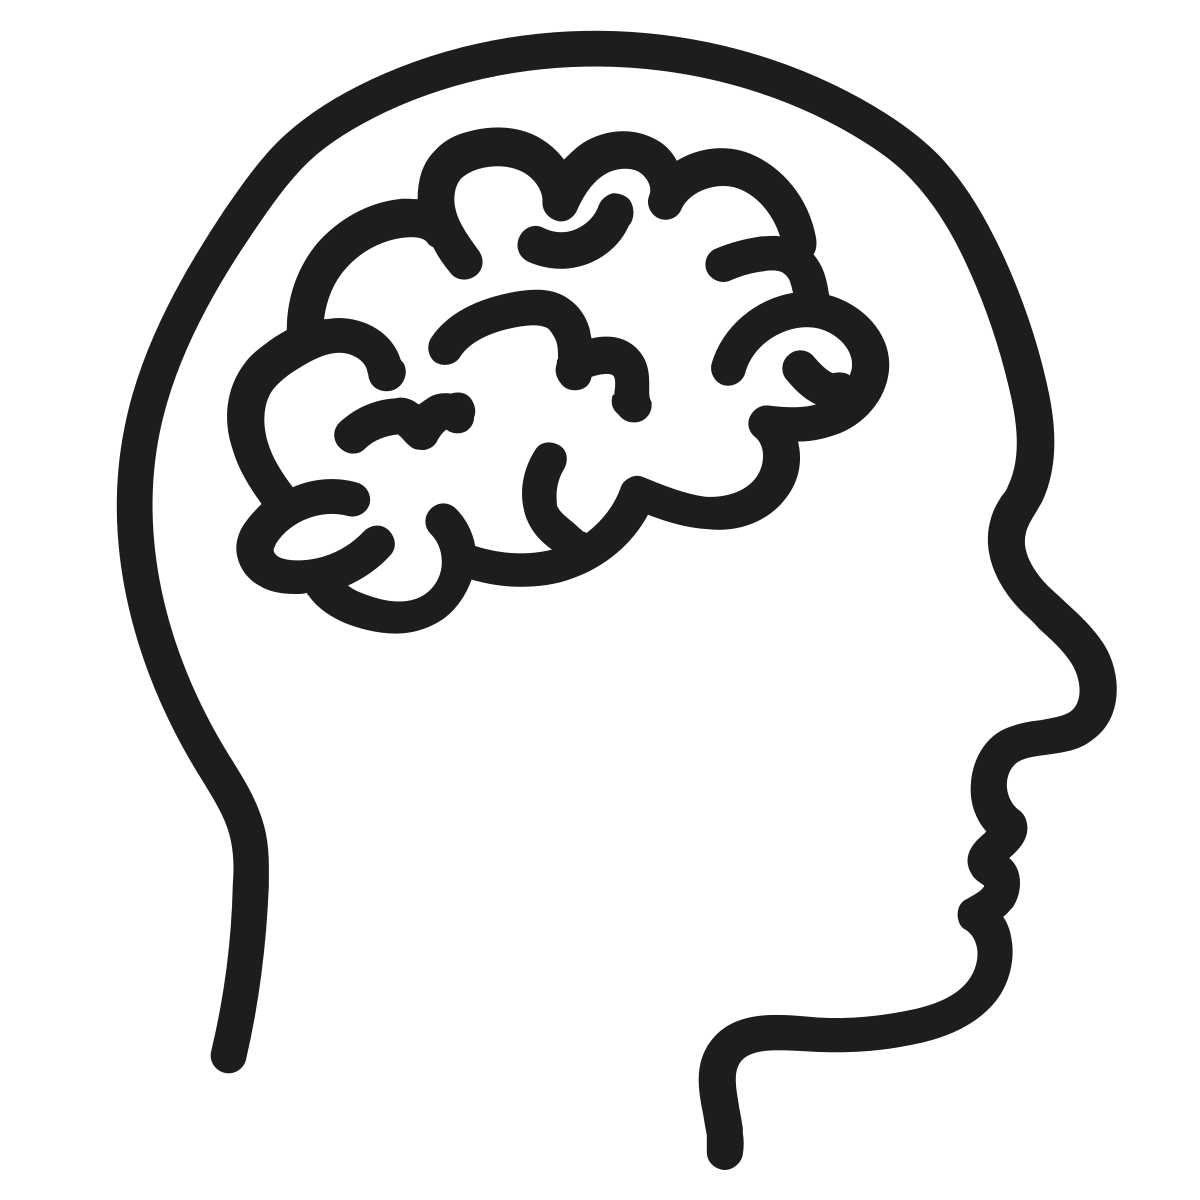 icon of a person with an overlay of a brain